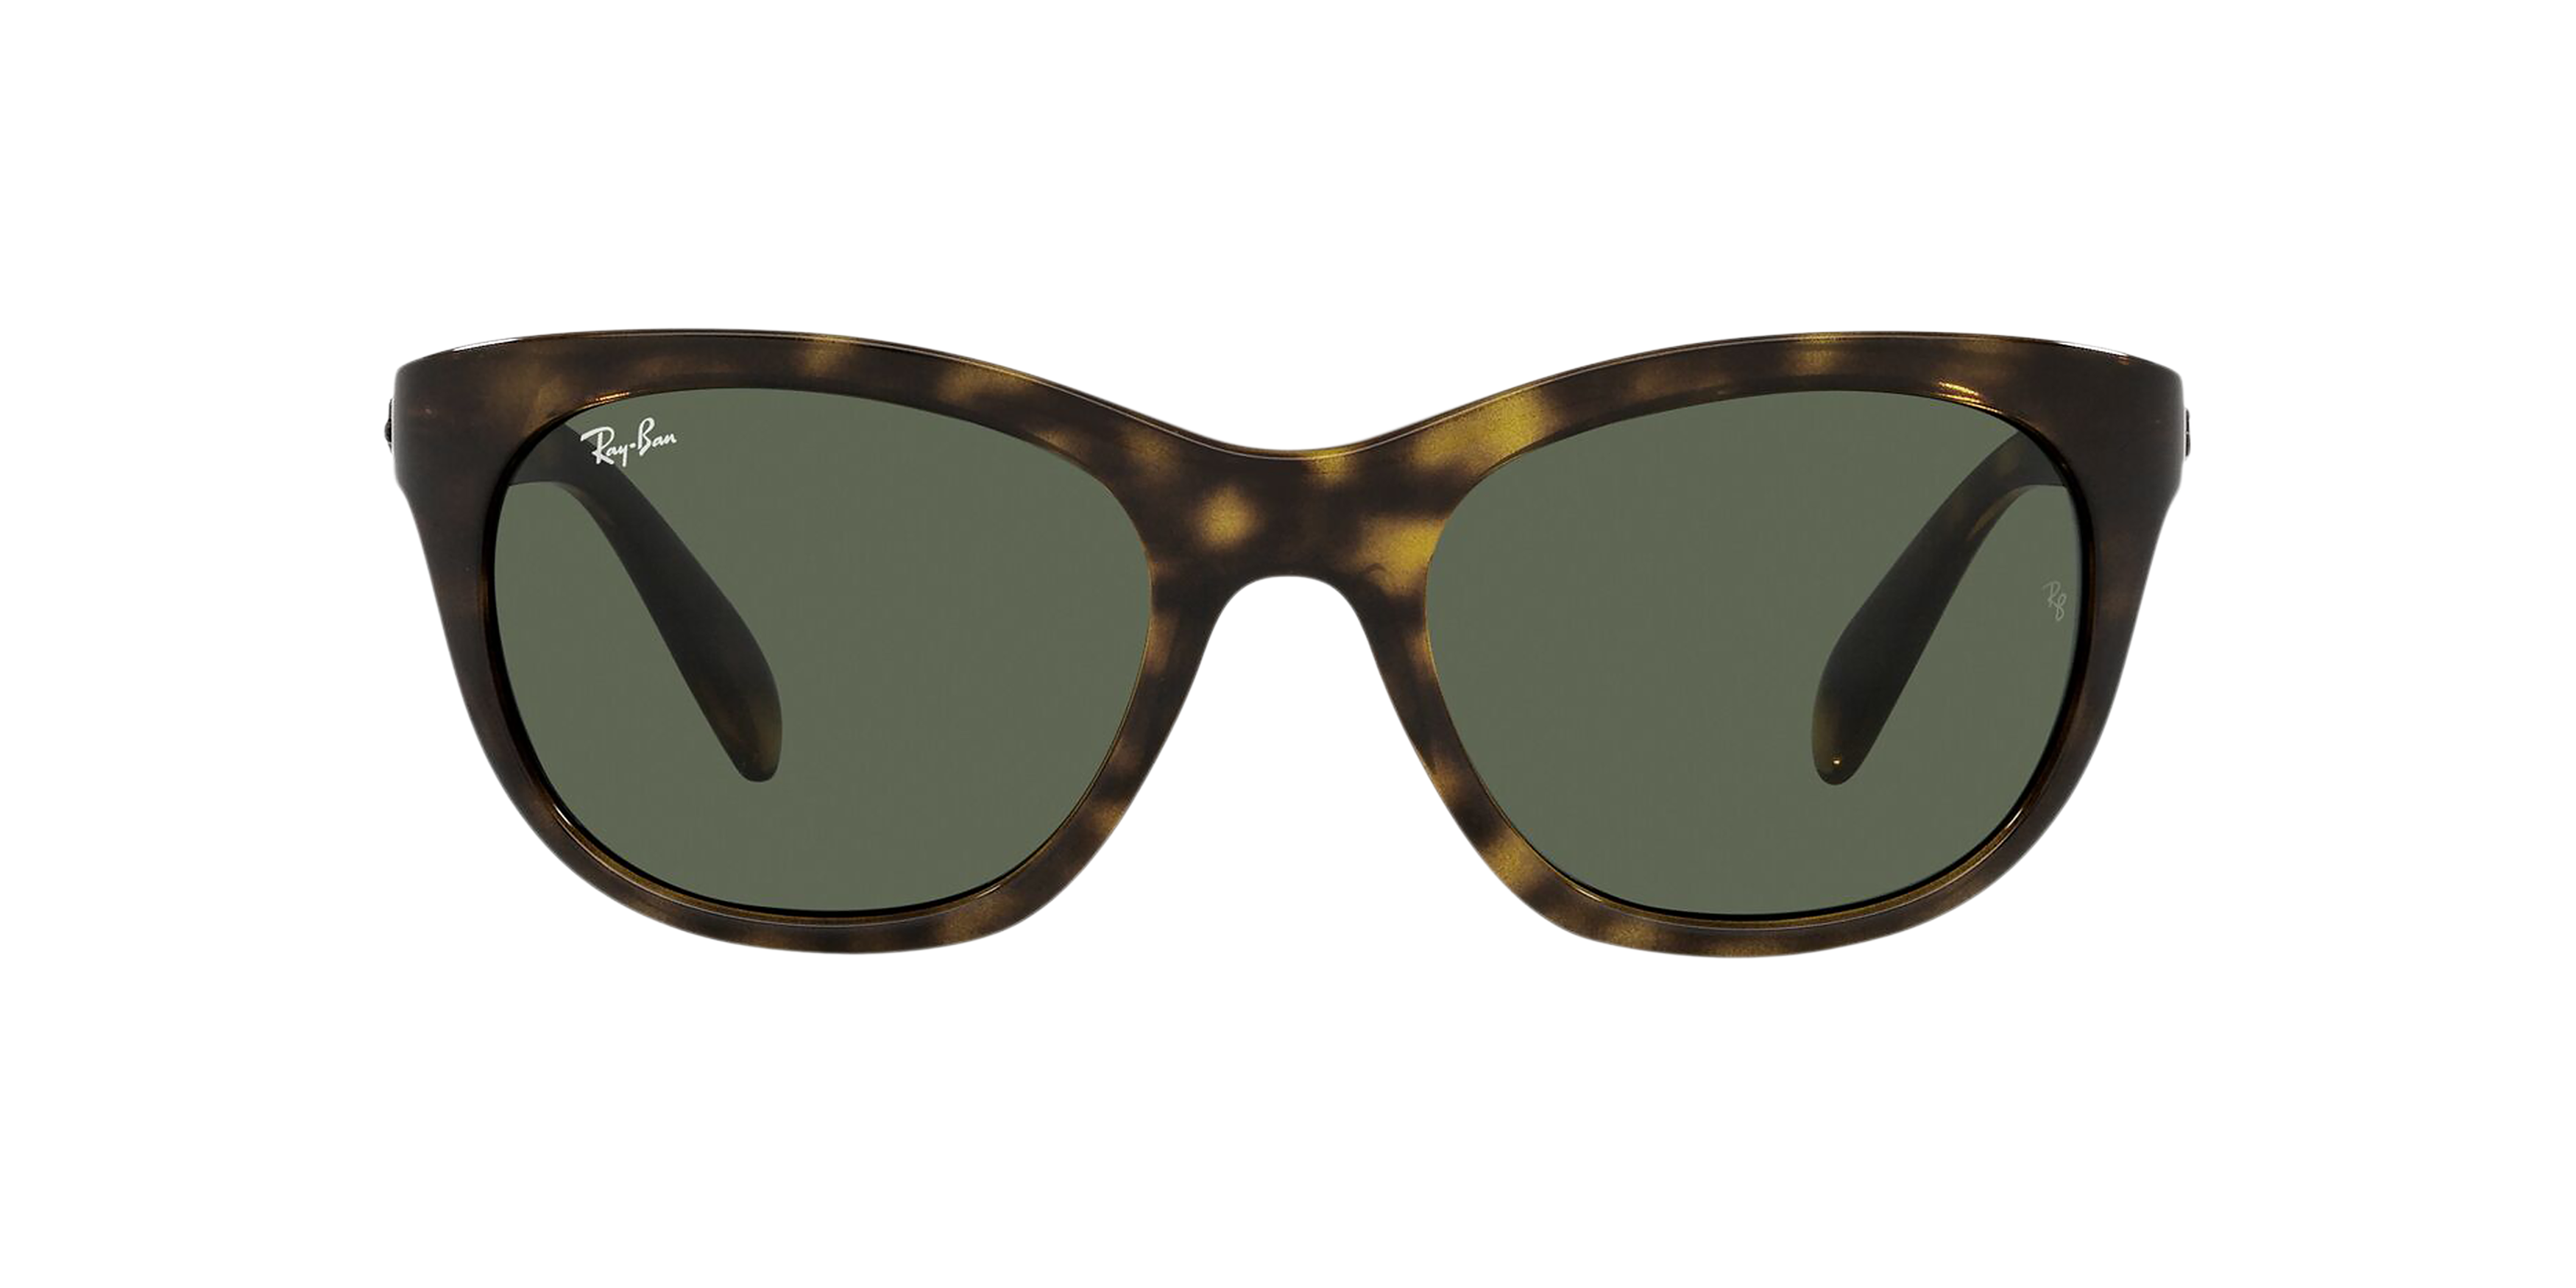 [products.image.front] RAY-BAN RB4216 710/71